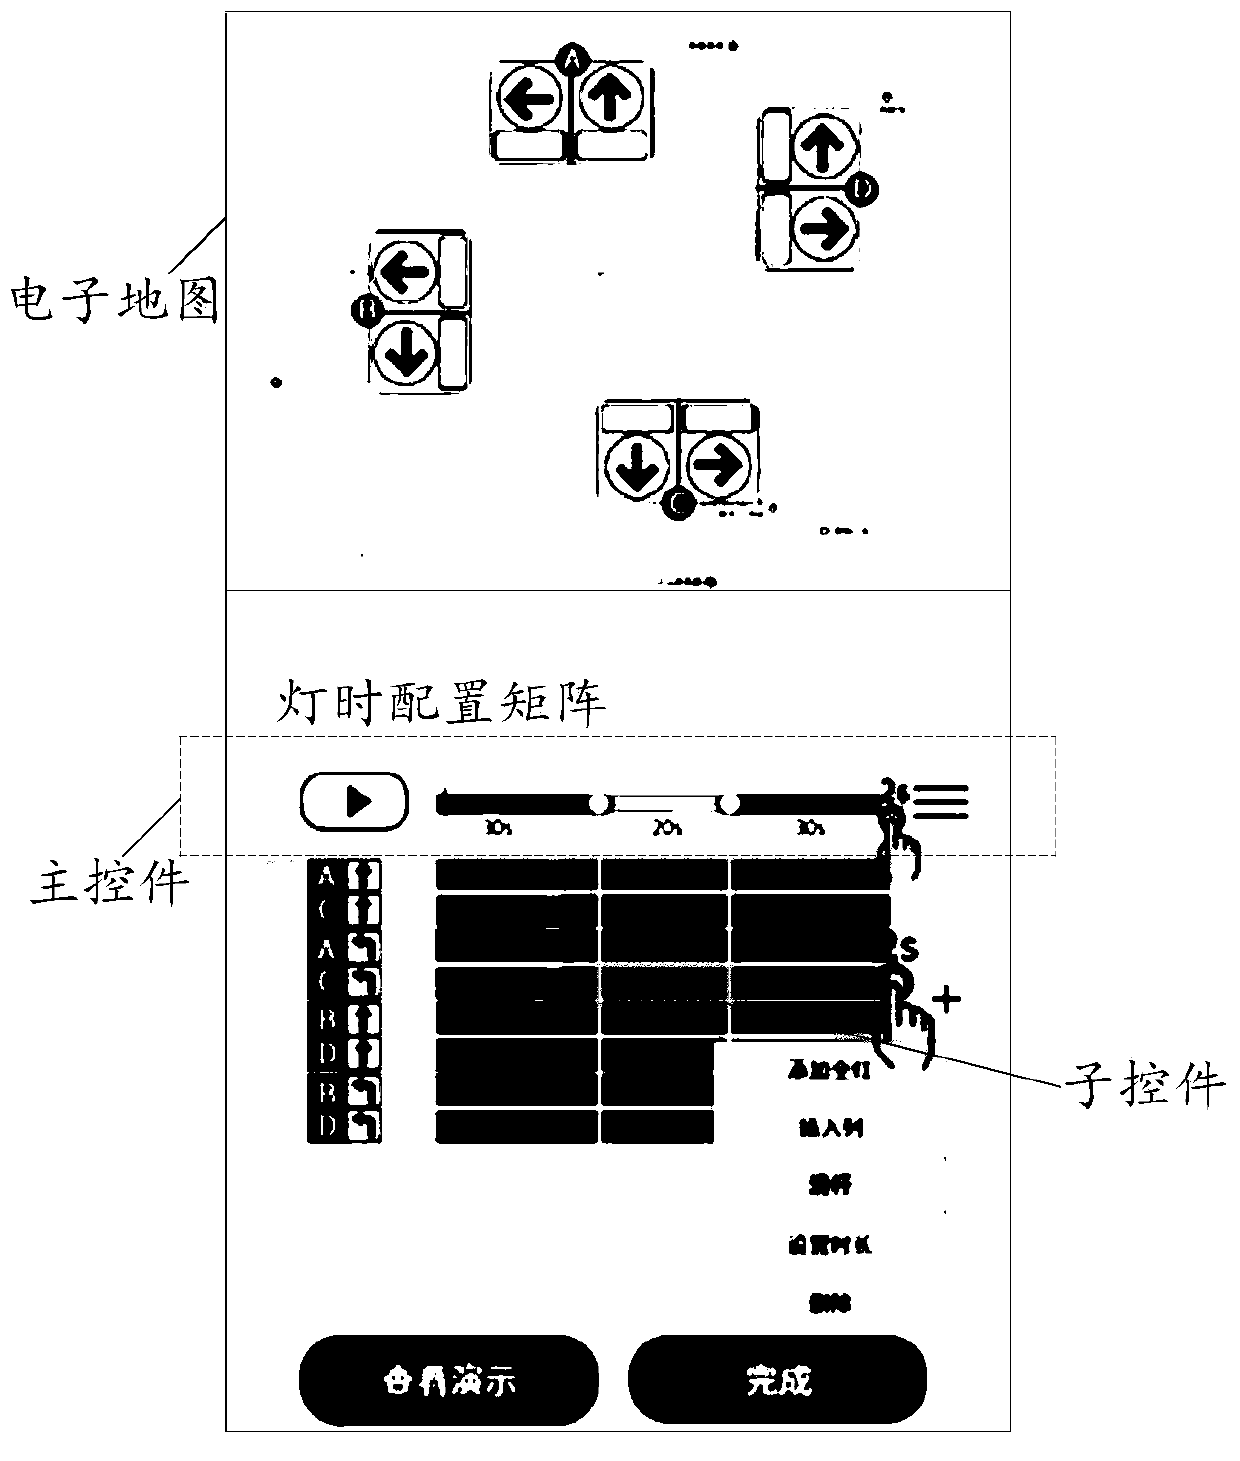 Traffic signal controller configuration method and device